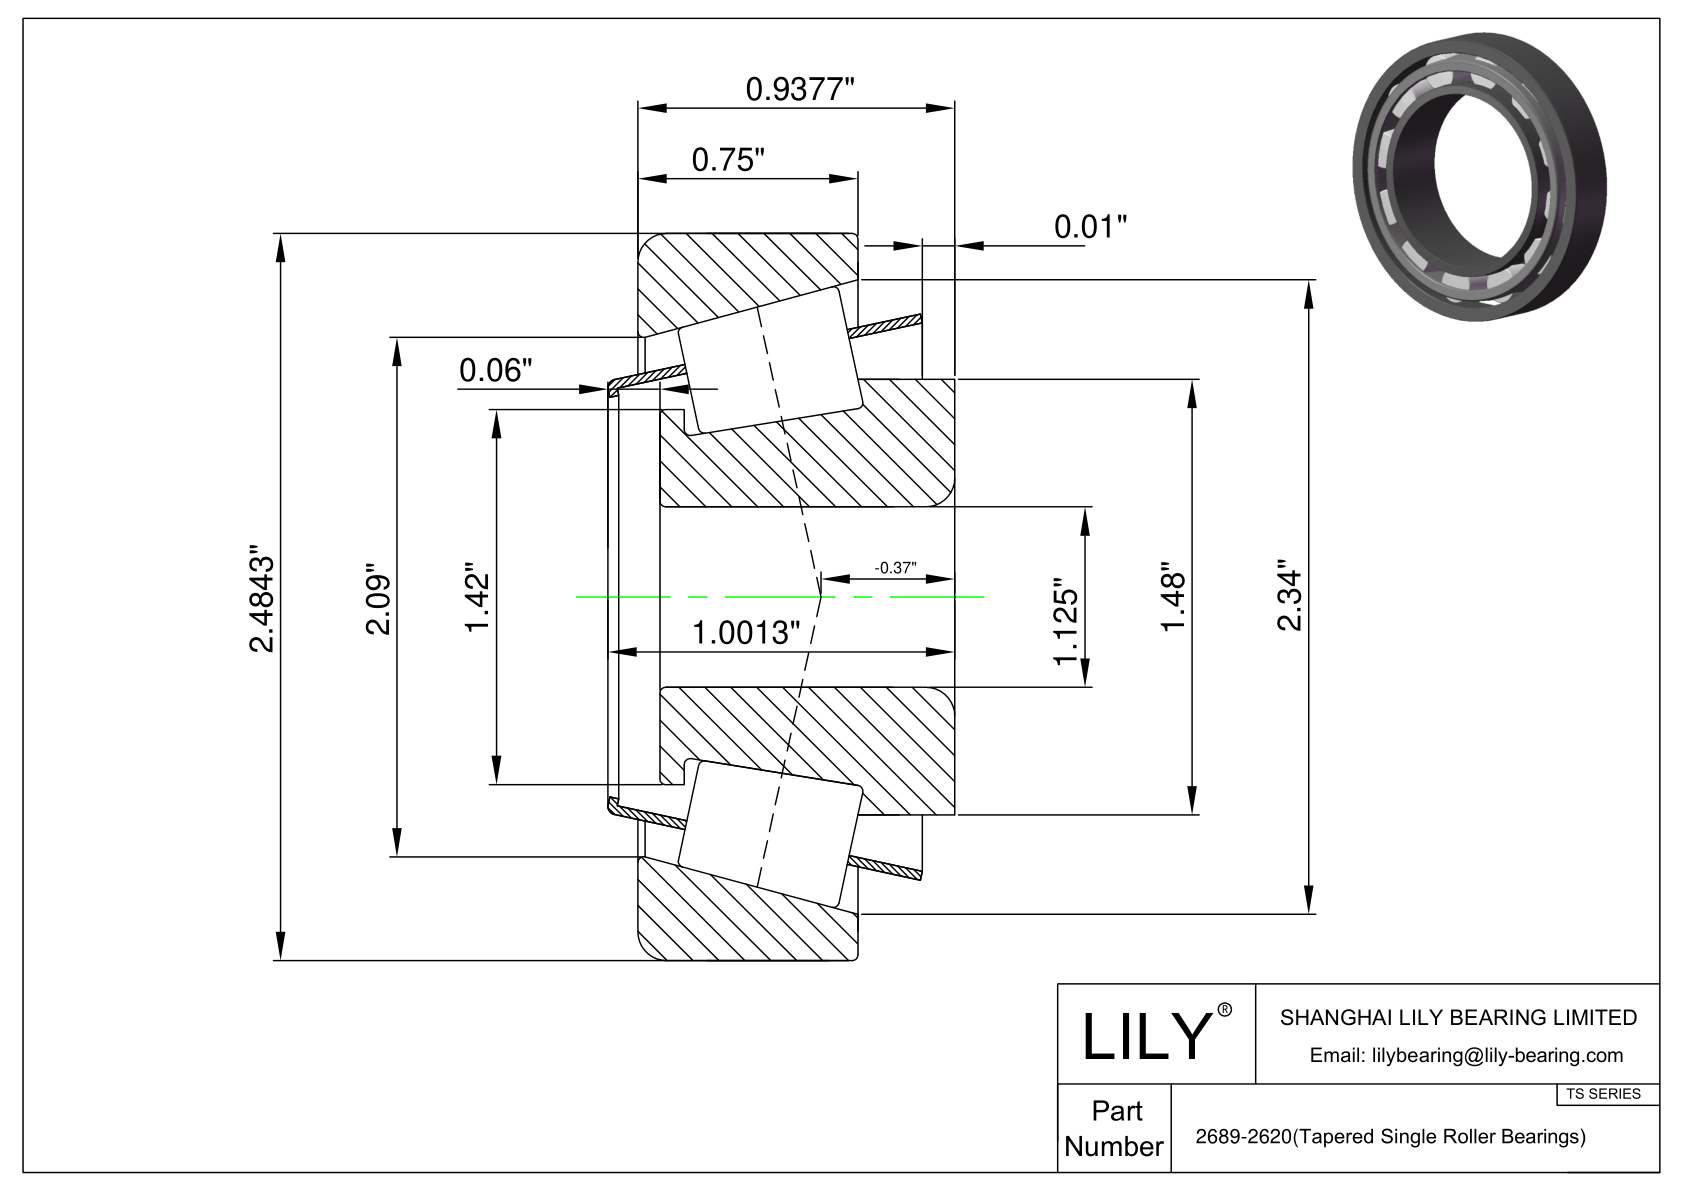 2689-2620 TS (Tapered Single Roller Bearings) (Imperial) cad drawing